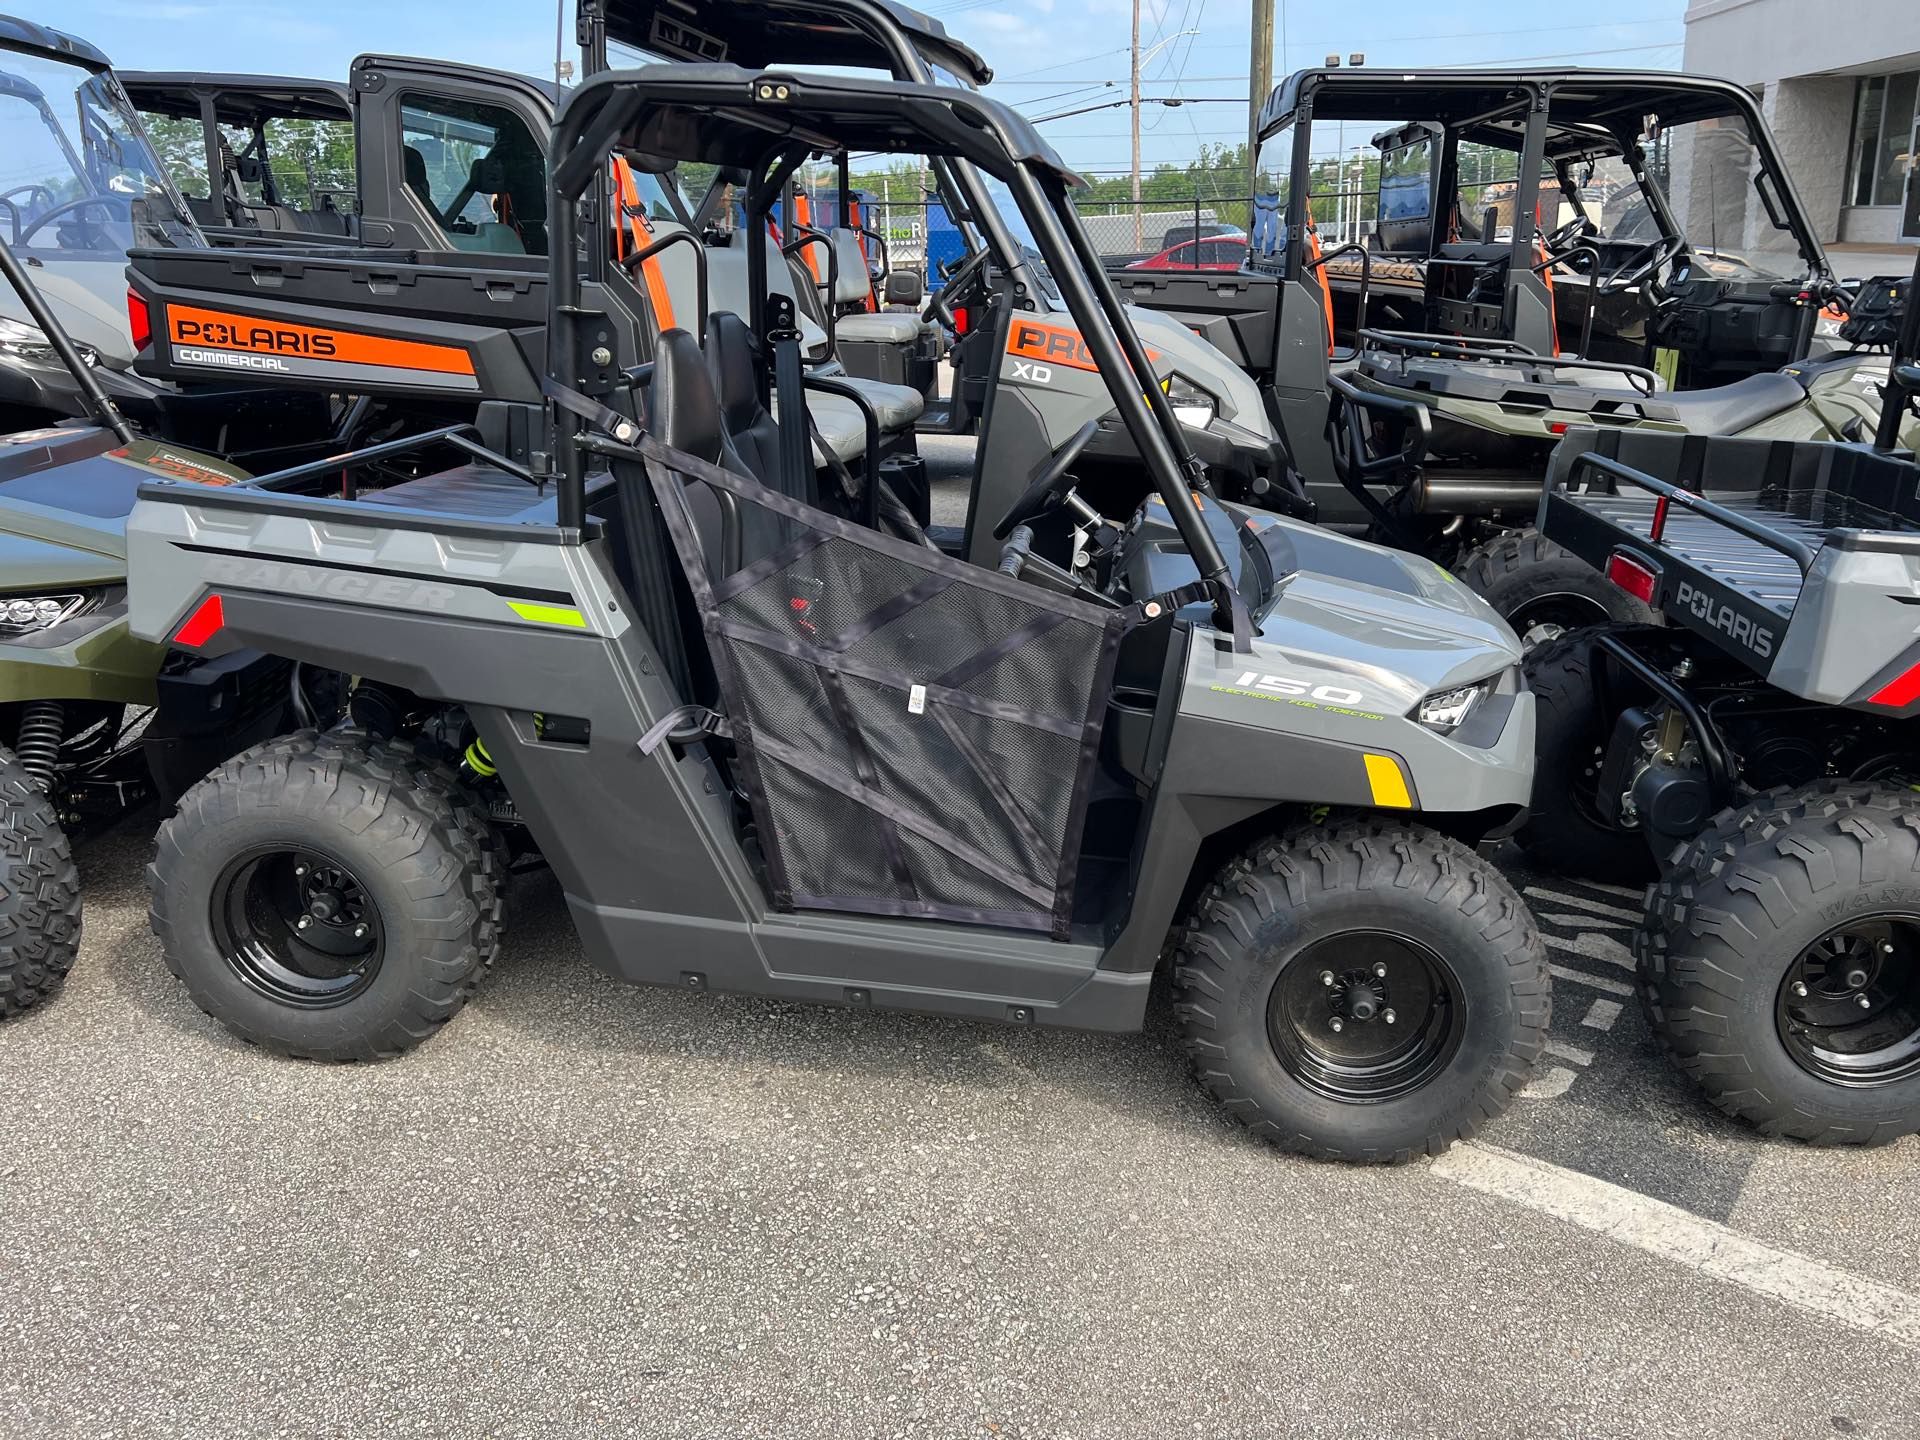 2023 Polaris Ranger 150 EFI in Knoxville, Tennessee